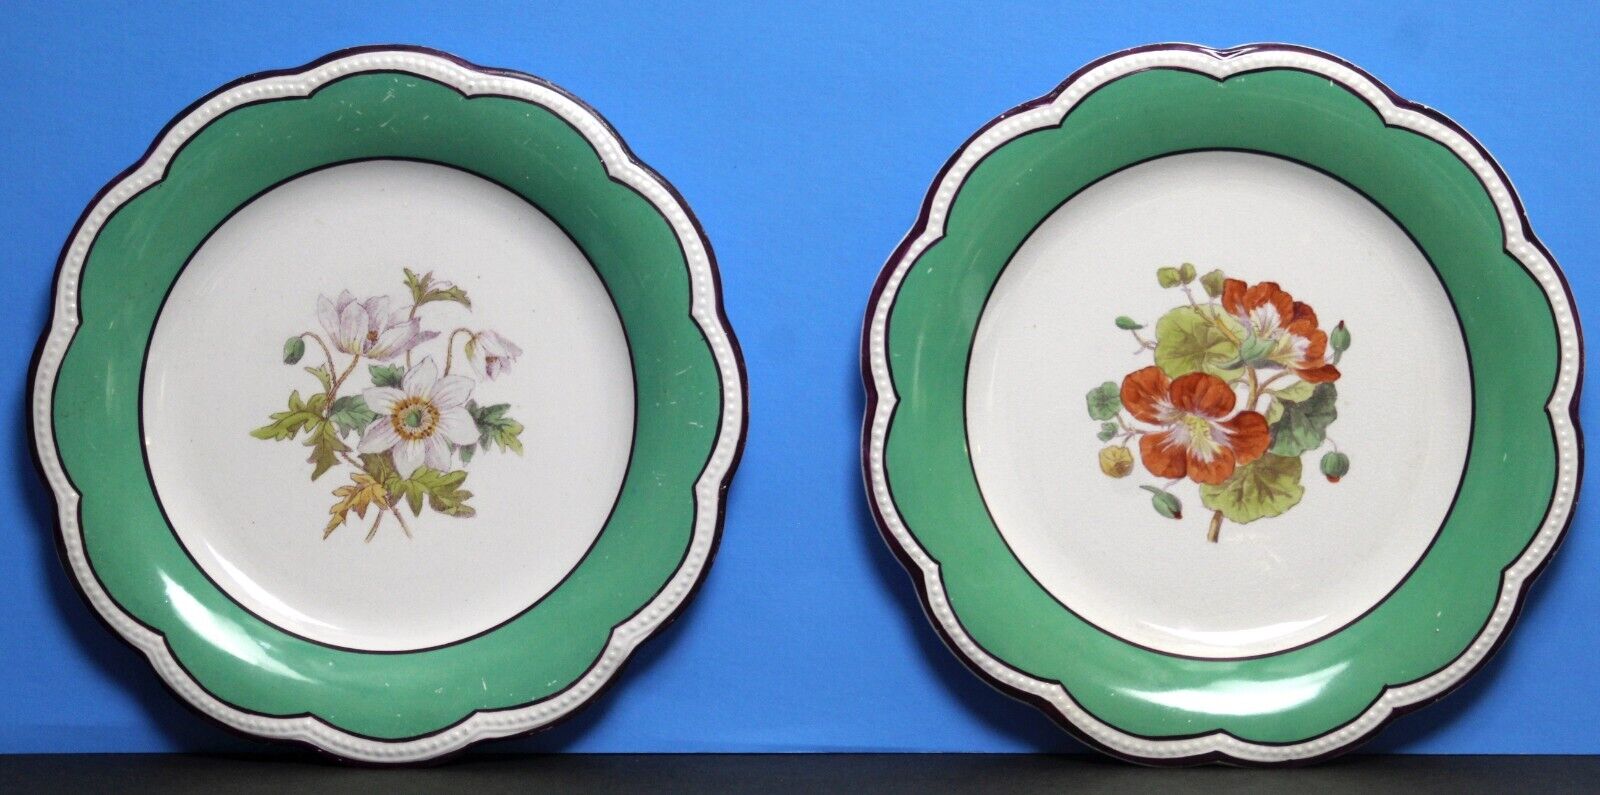 William Brownfield China Dinner Plates English Registry Stamped 1870  -SCARCE